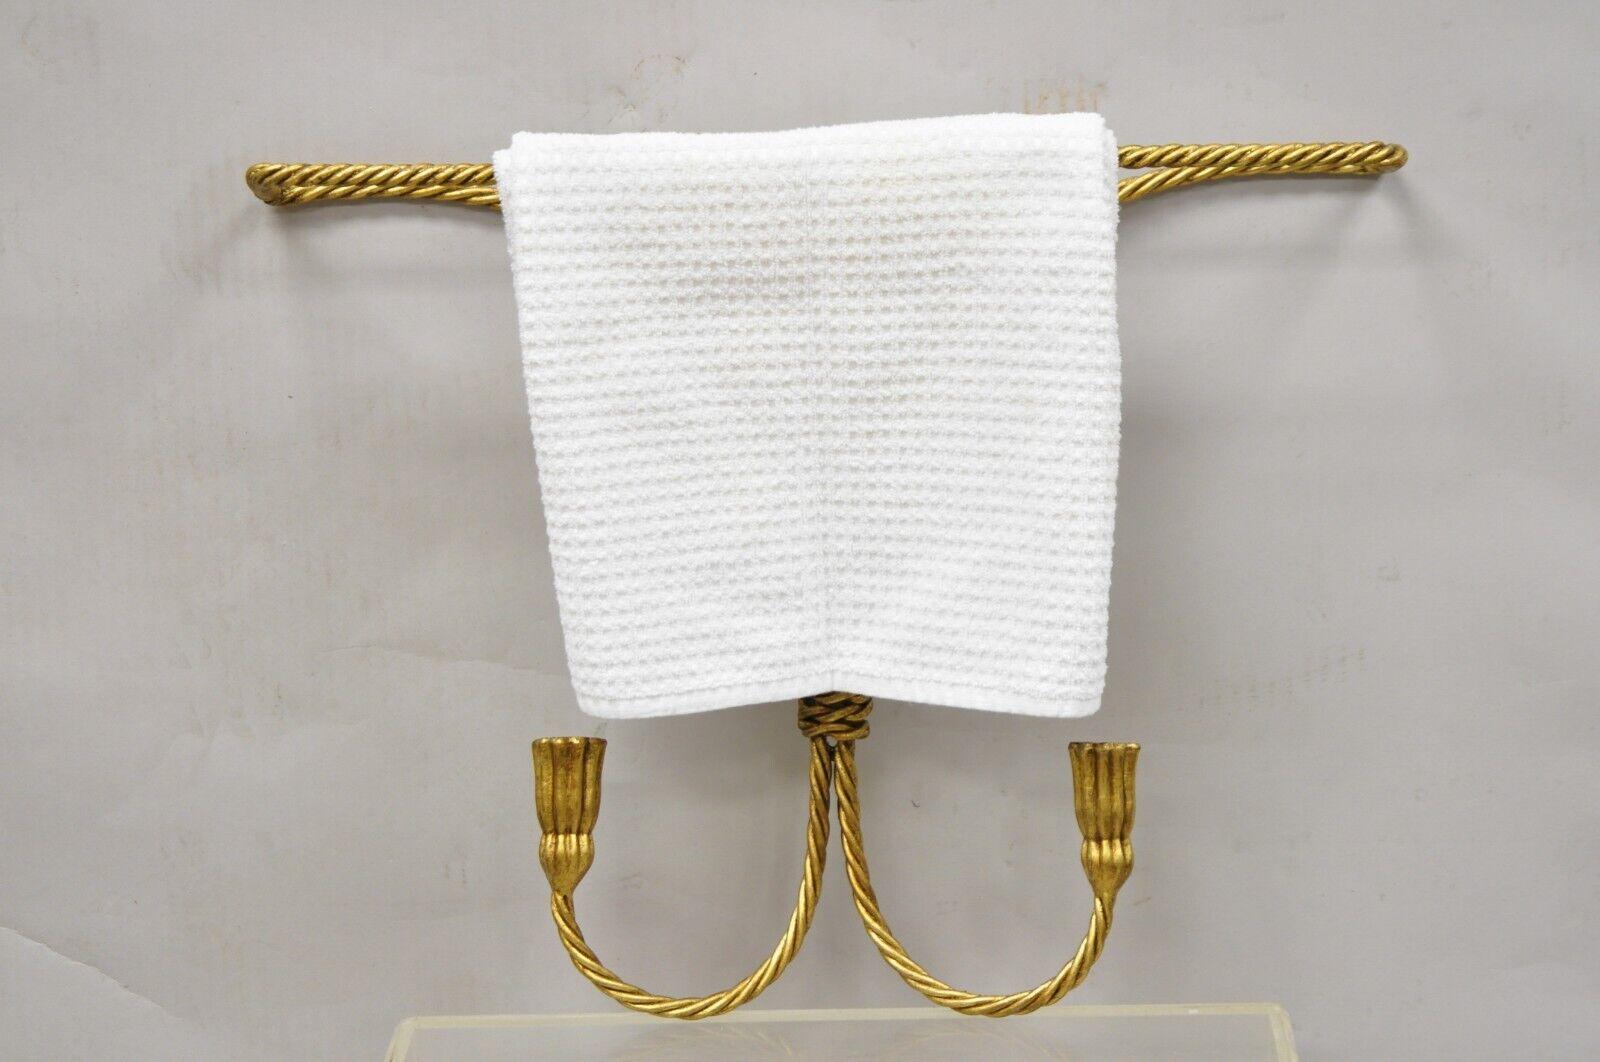 Vintage Italian Hollywood Regency Gold Gilt Iron Wall Mount Rope Tassel Towel Rod Bar Holder. Item features scrolling iron rope and tassel frame, single towel rod, wall mount design, very nice vintage item, quality Italian craftsmanship, great style